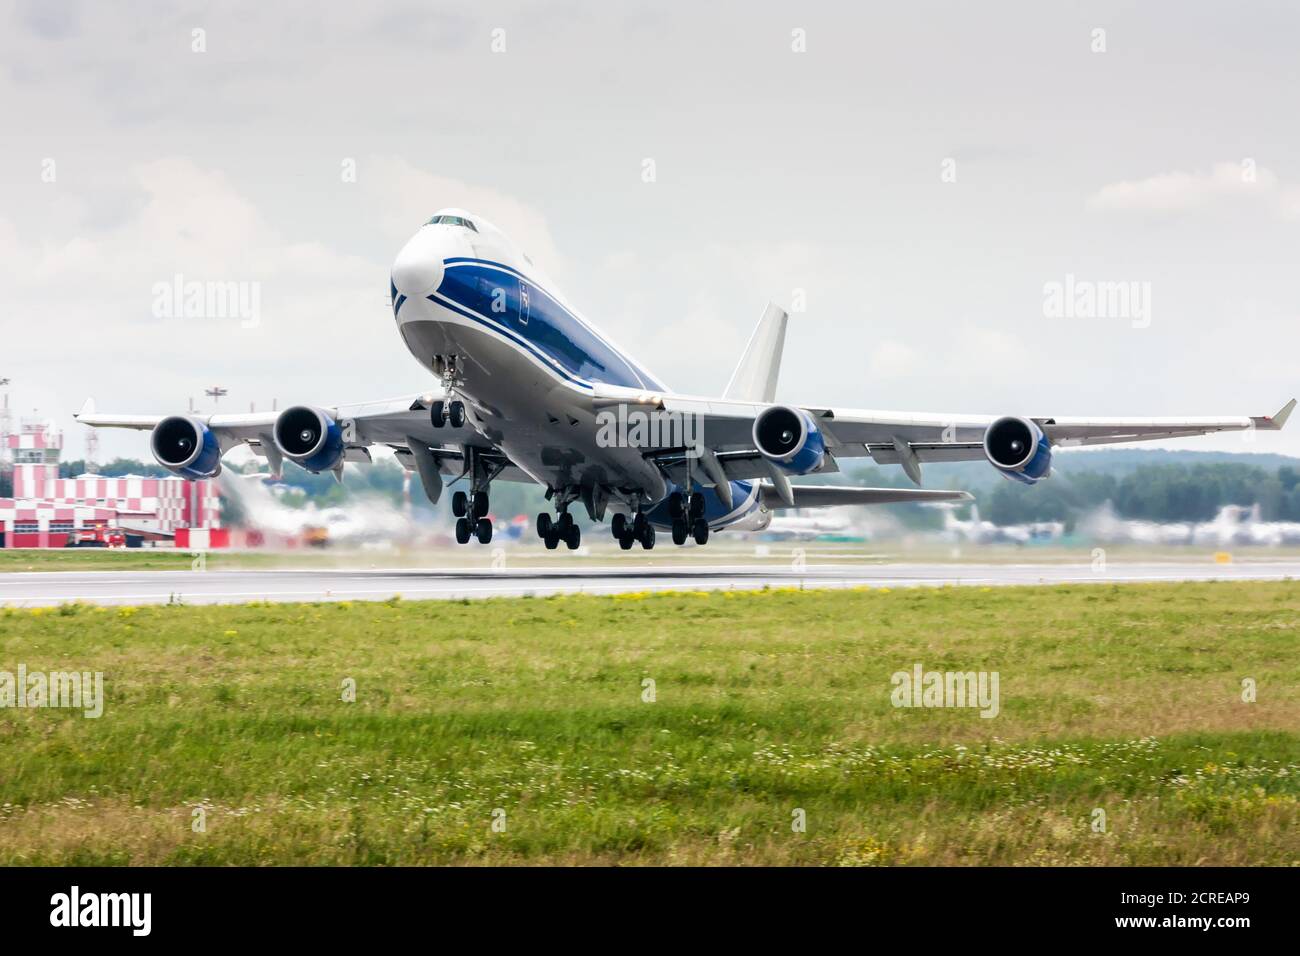 Take off of the wide body cargo airplane Stock Photo